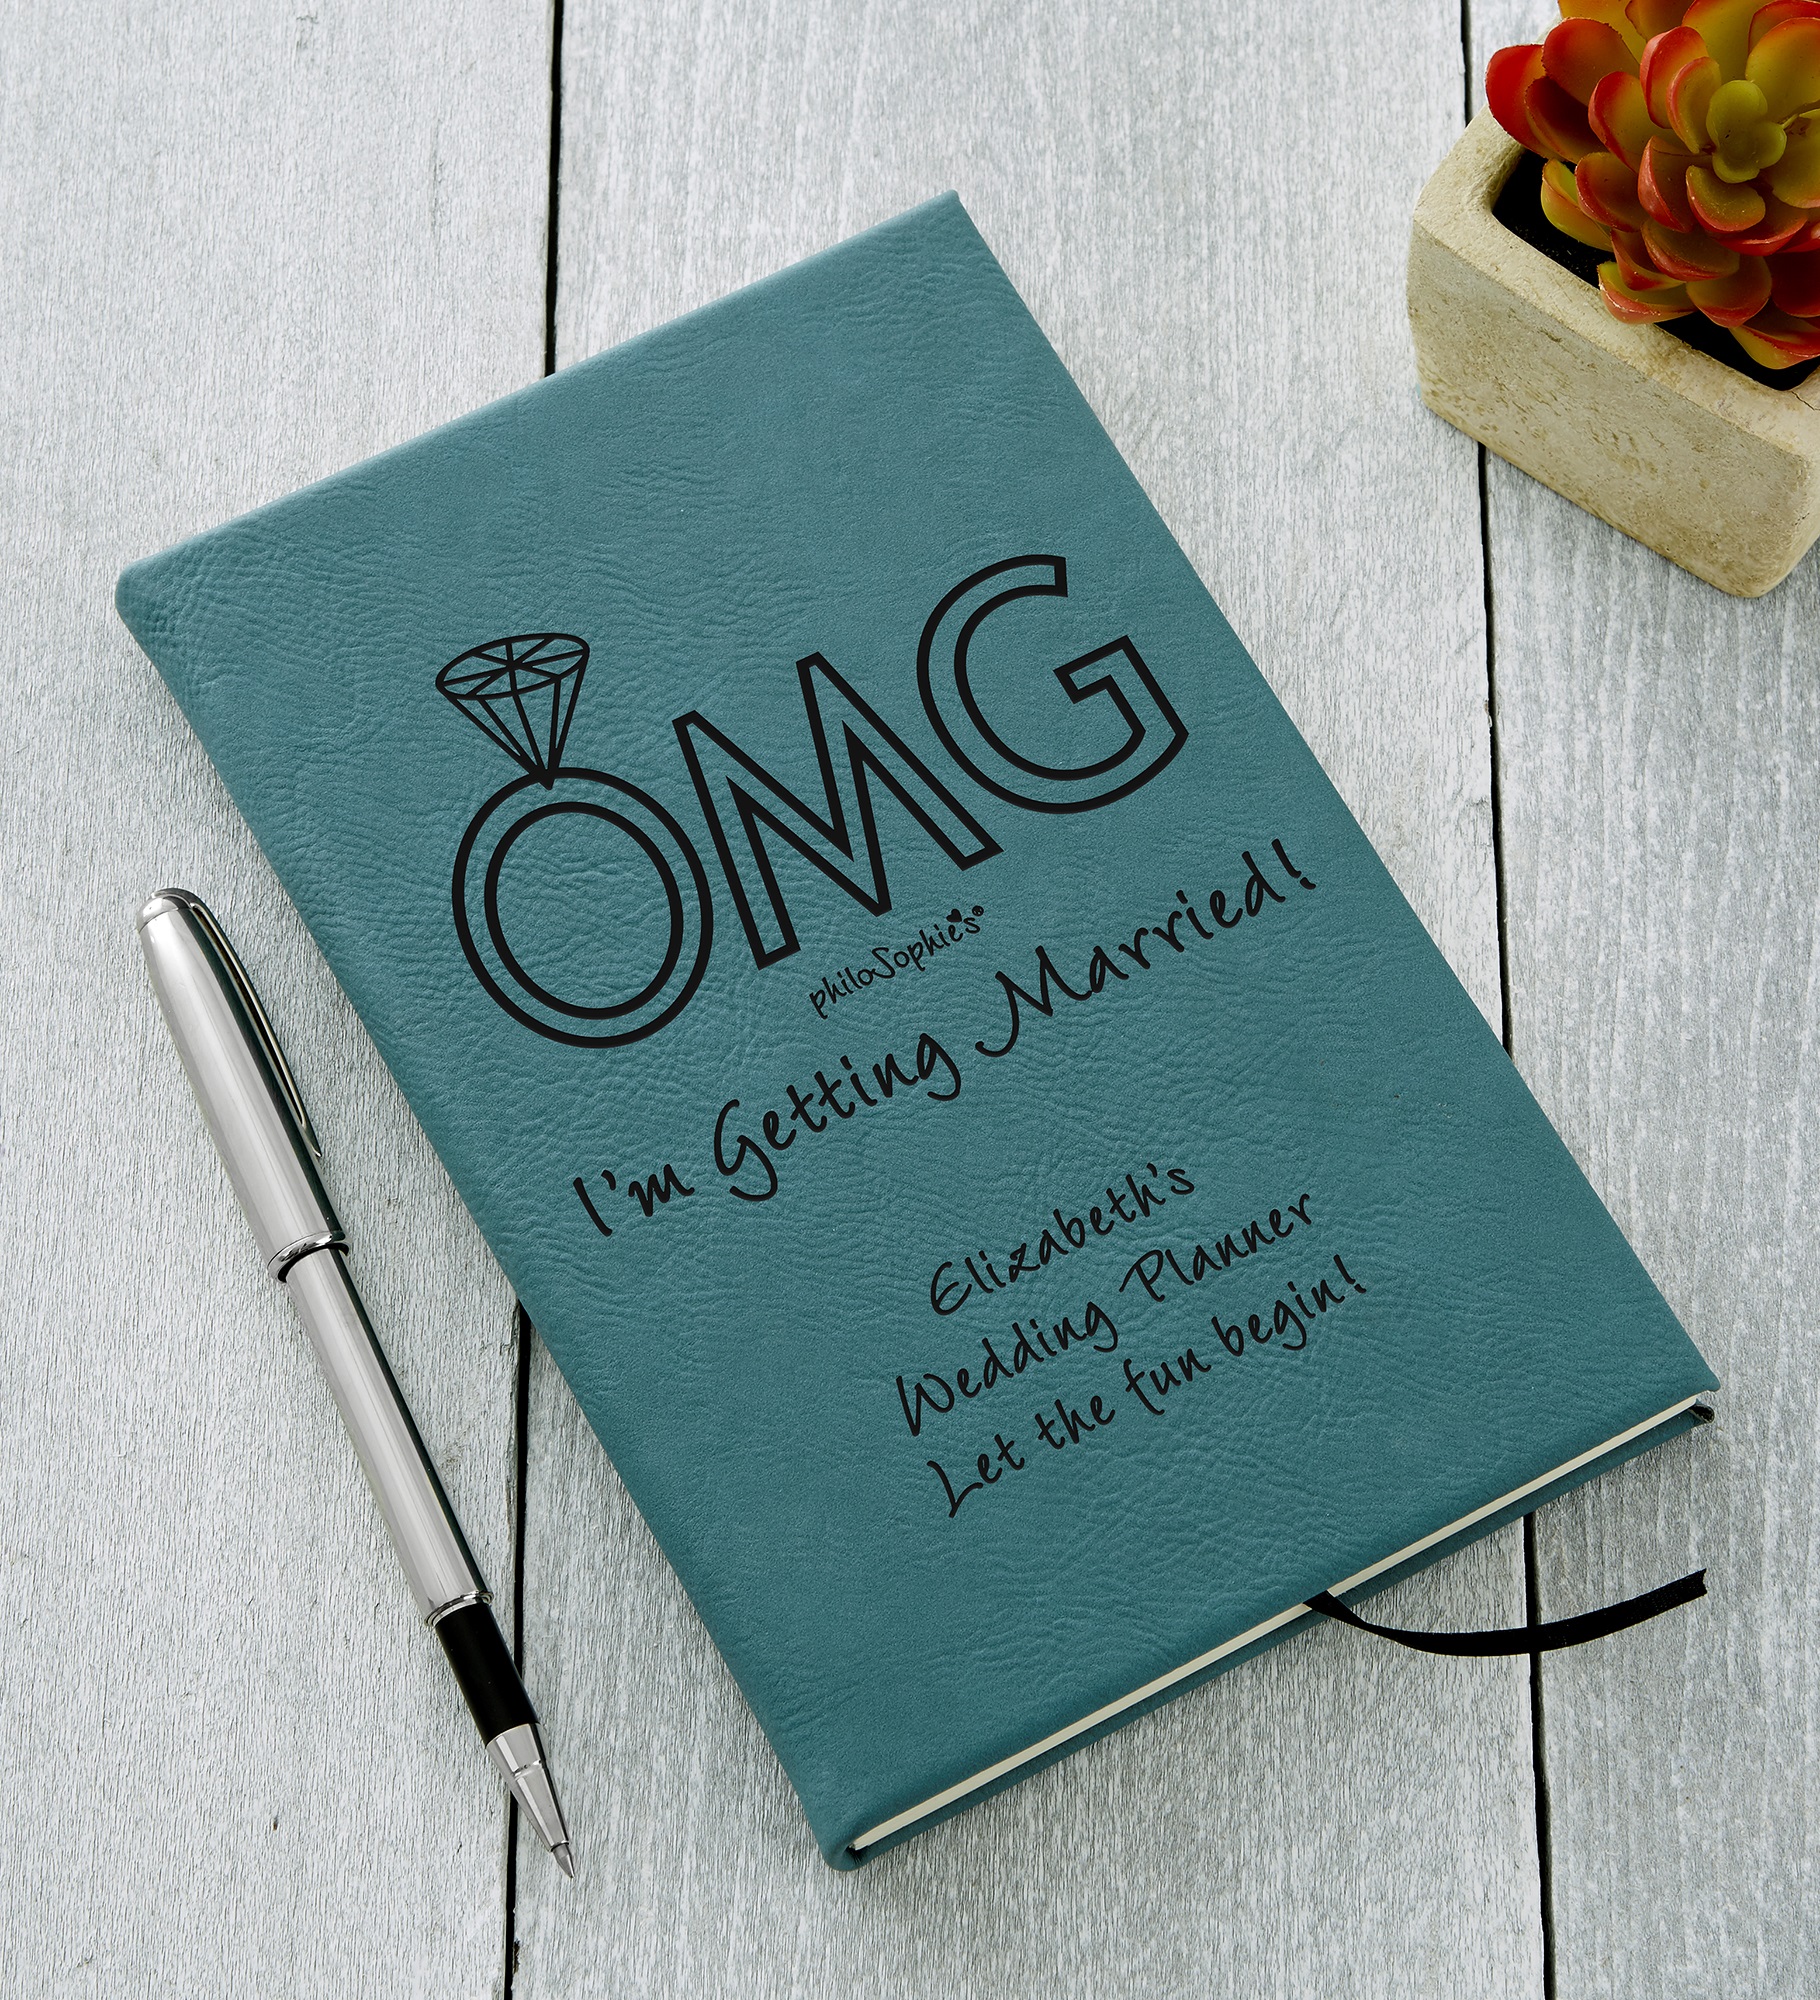 OMG I'm Getting Married philoSophie's® Personalized Wedding Planner